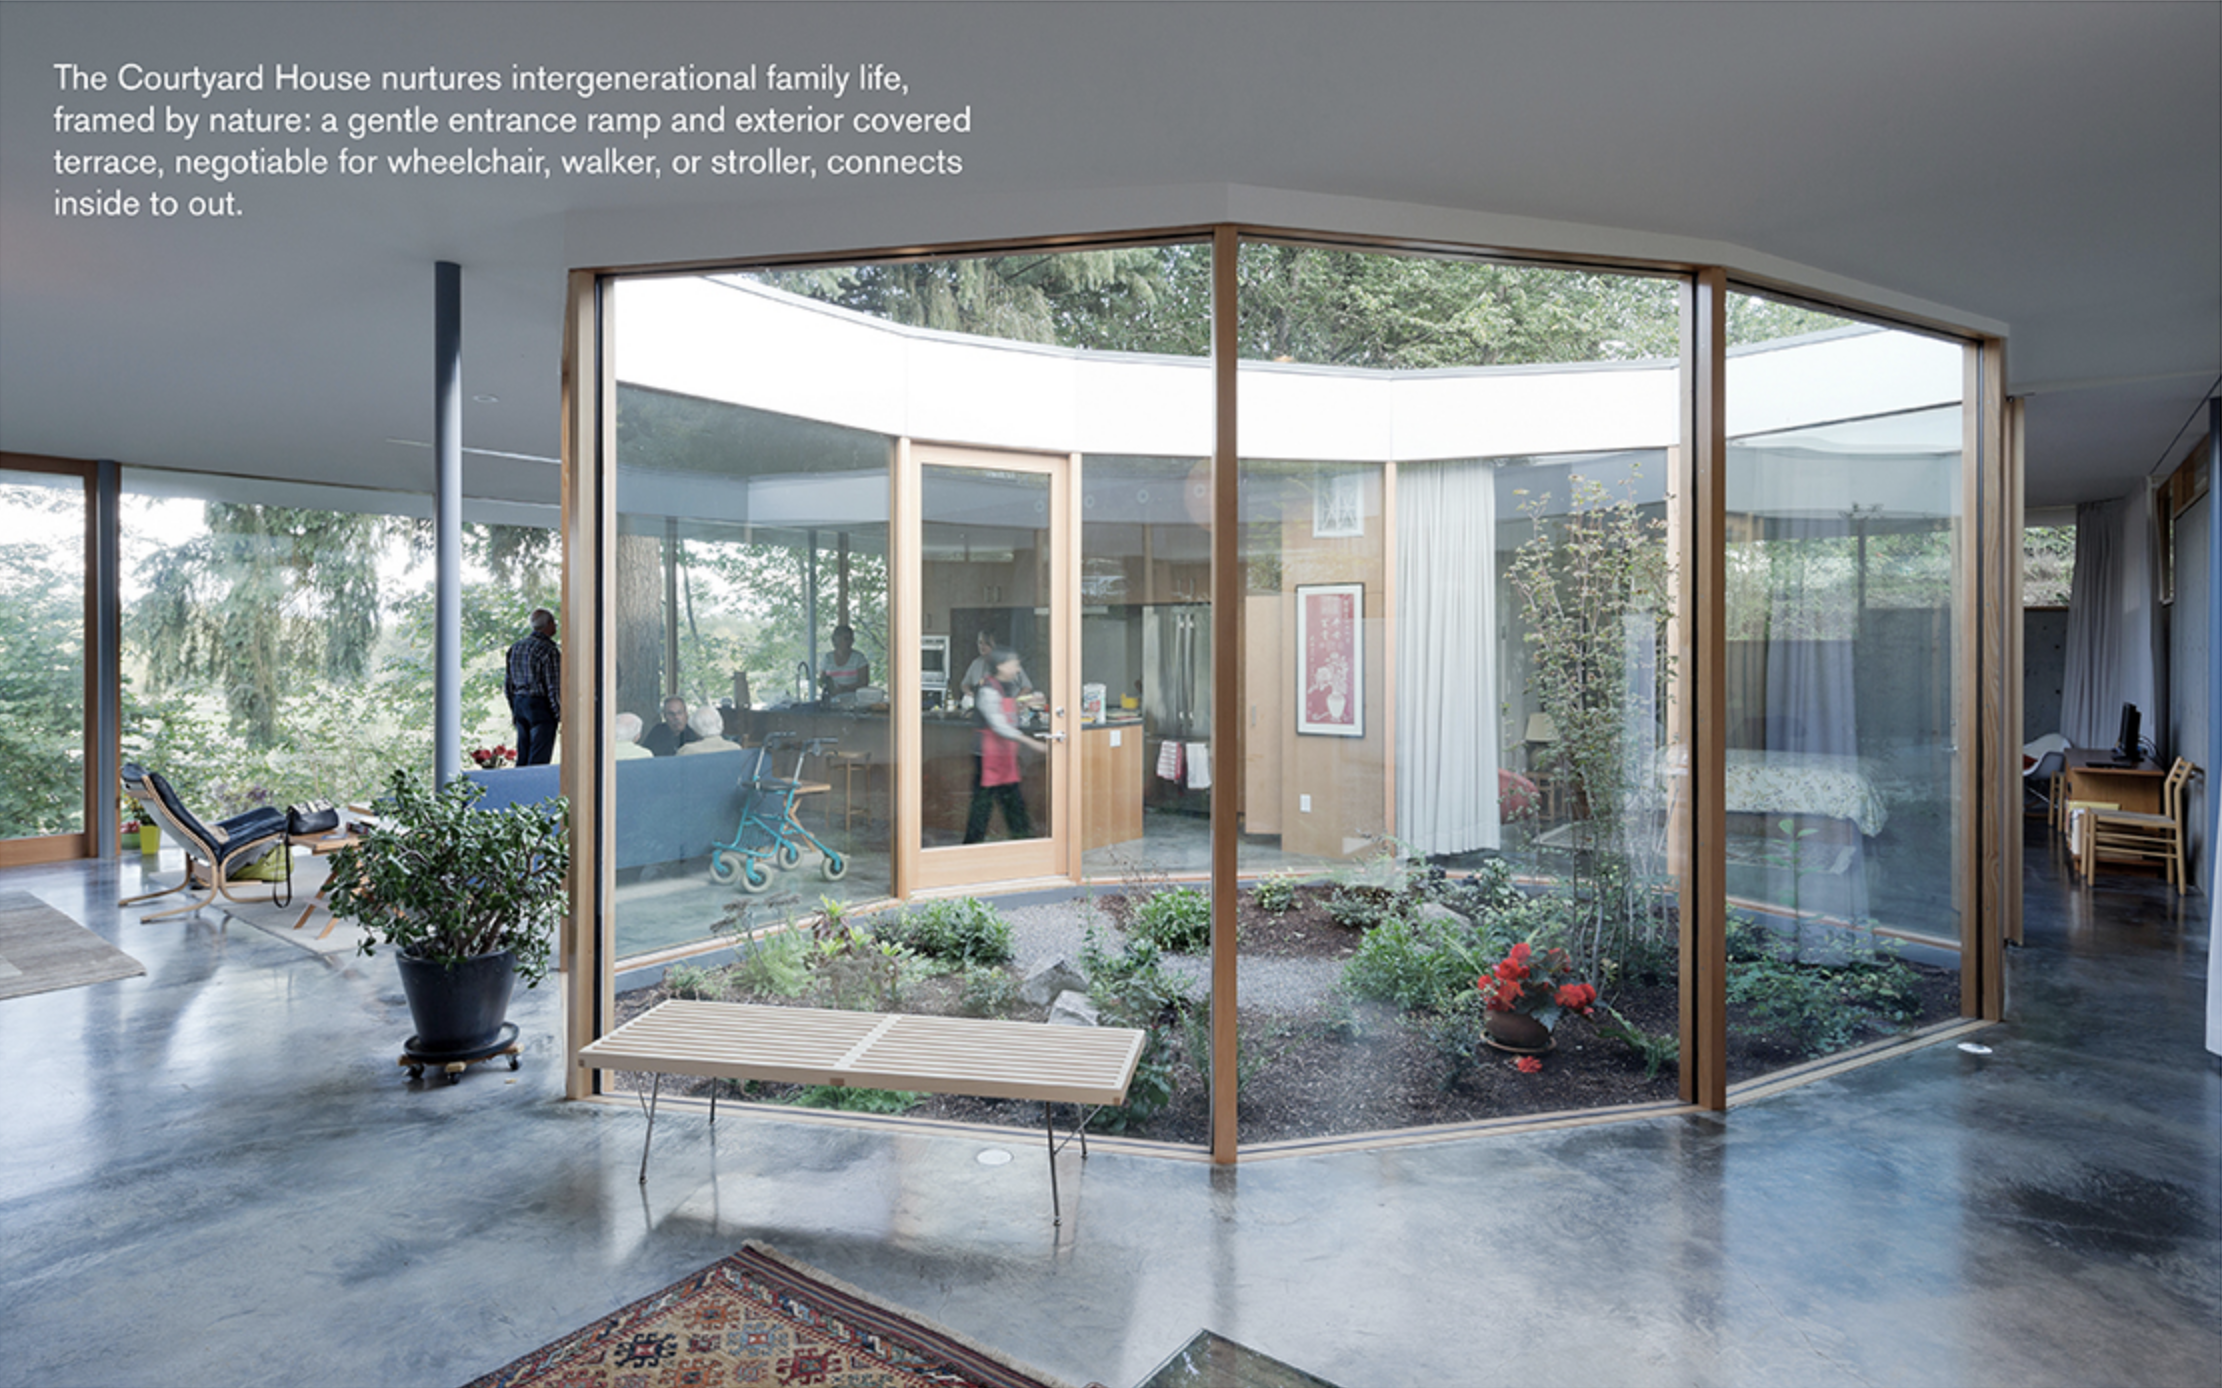 Courtyard House by NO ARCHITECTURE. Photo: NO ARCHITECTURE.